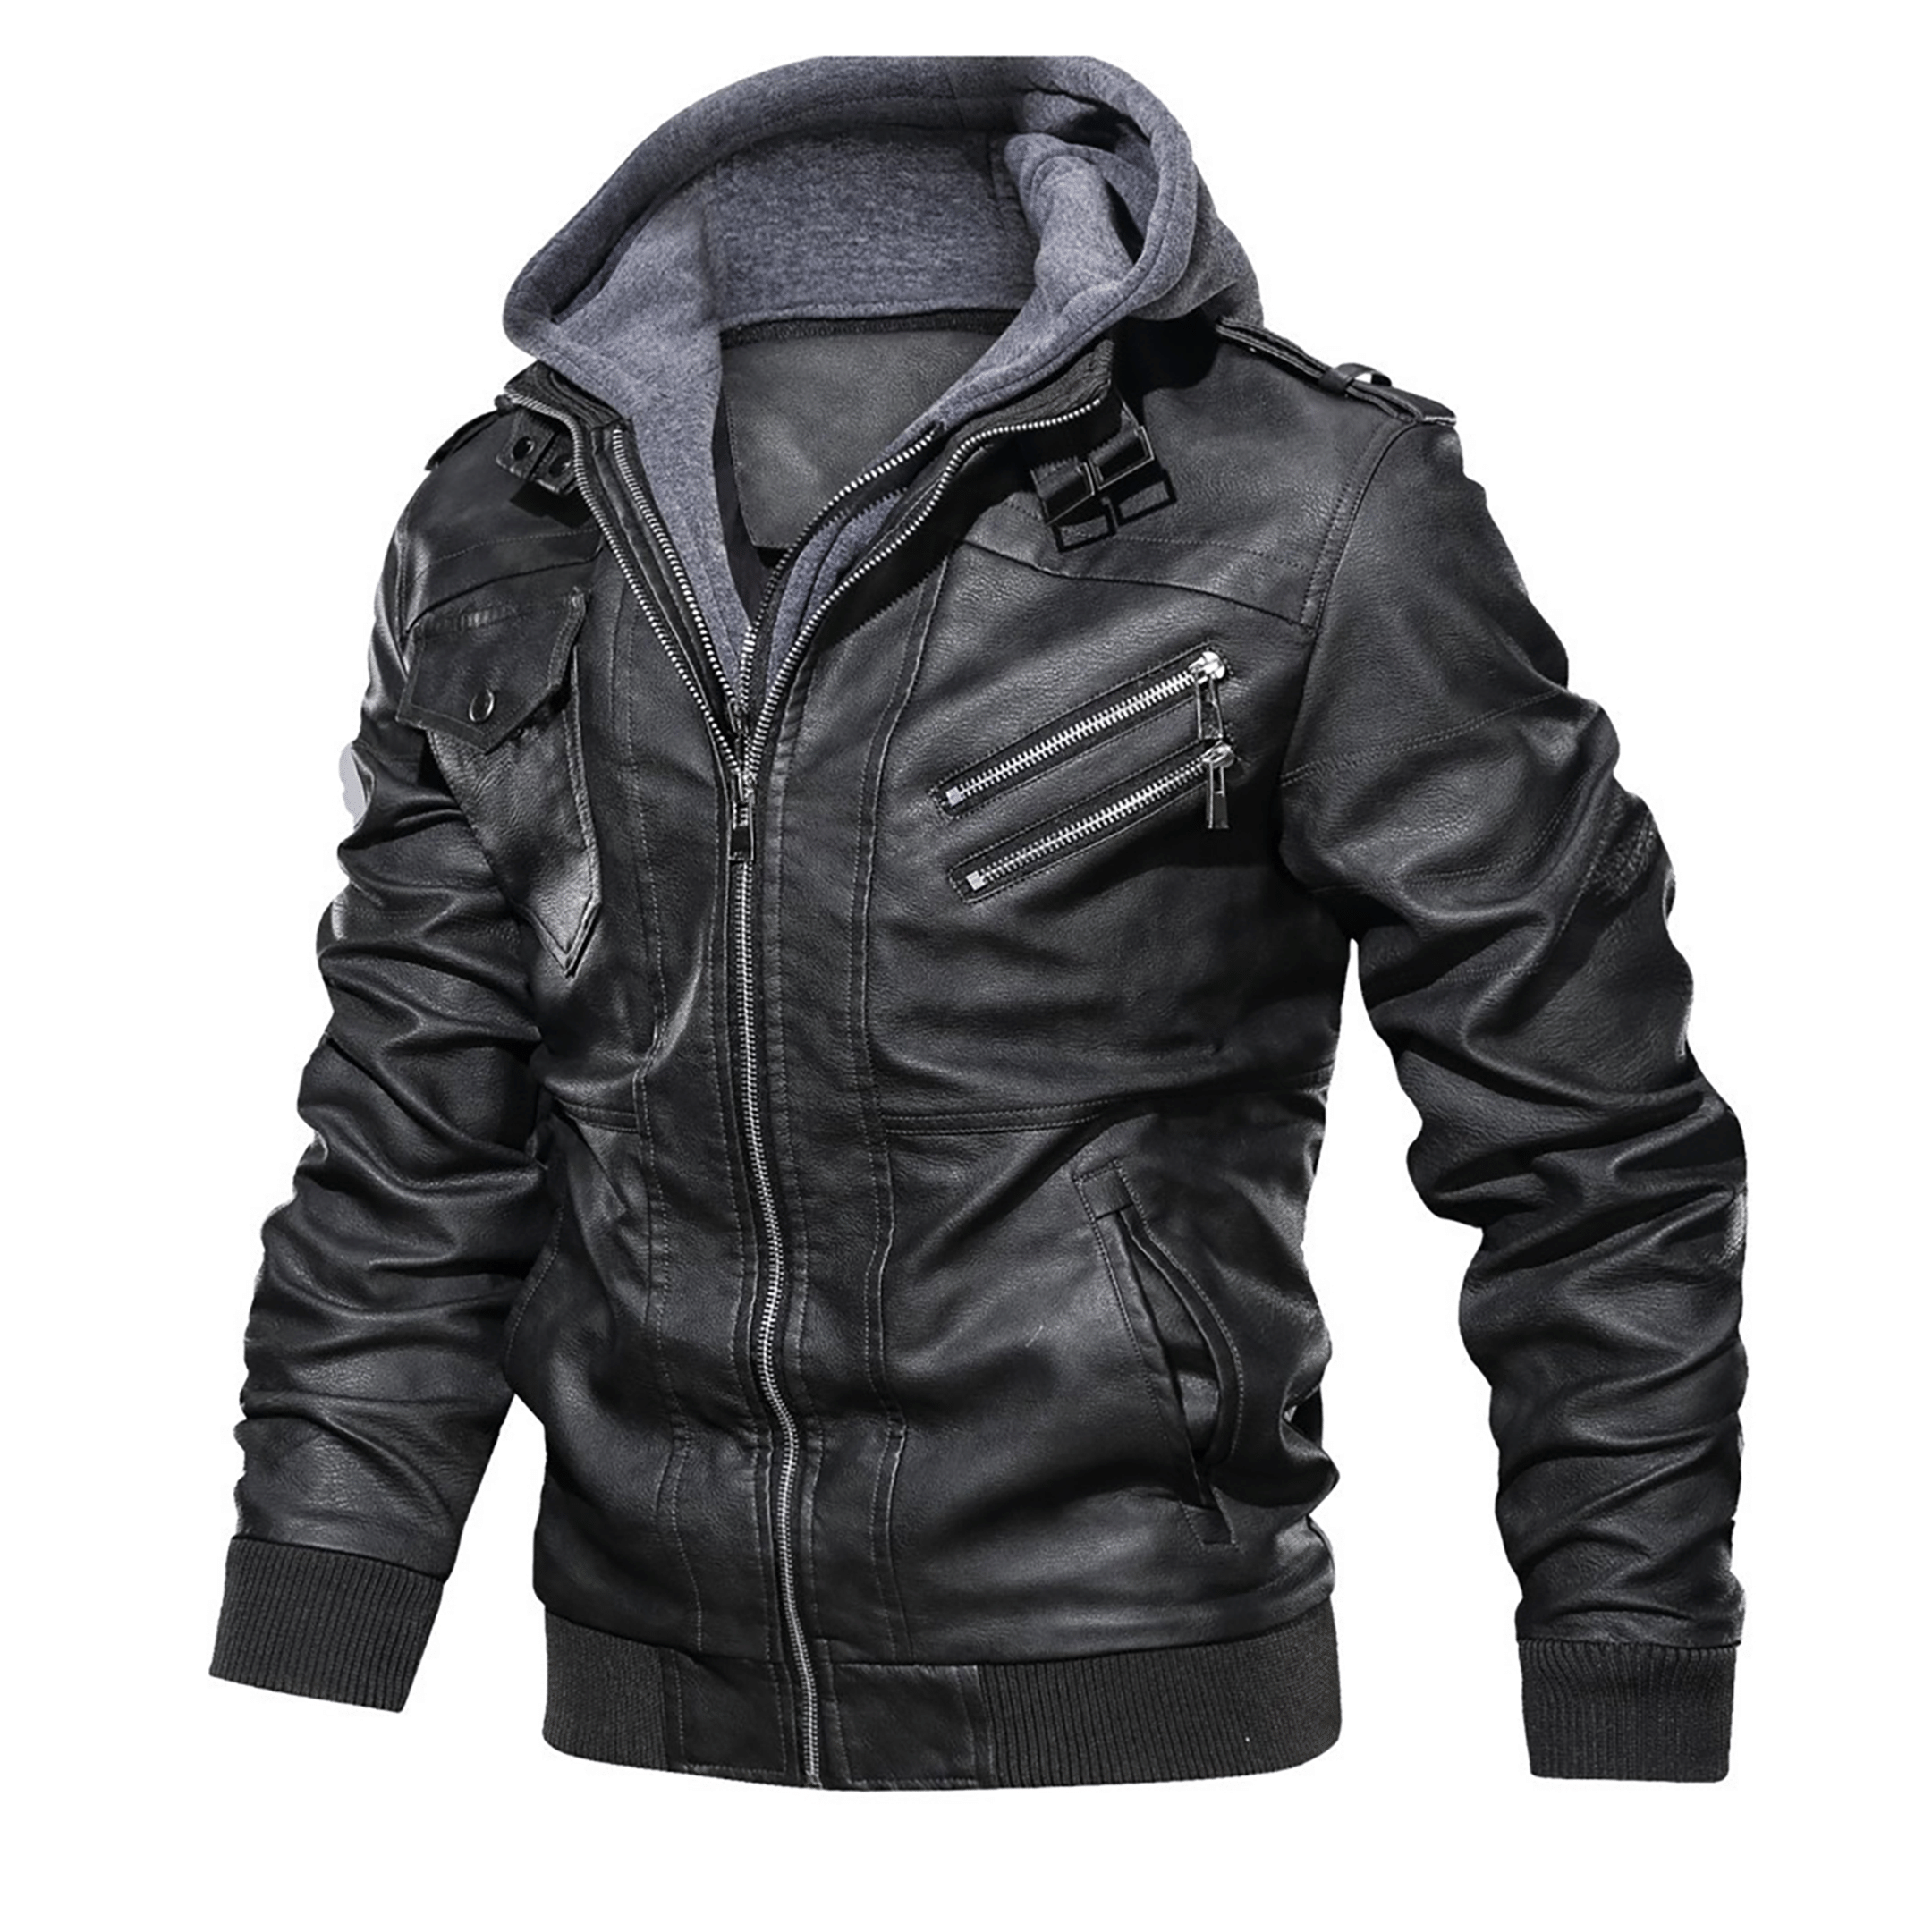 Top leather jackets and latest products 105